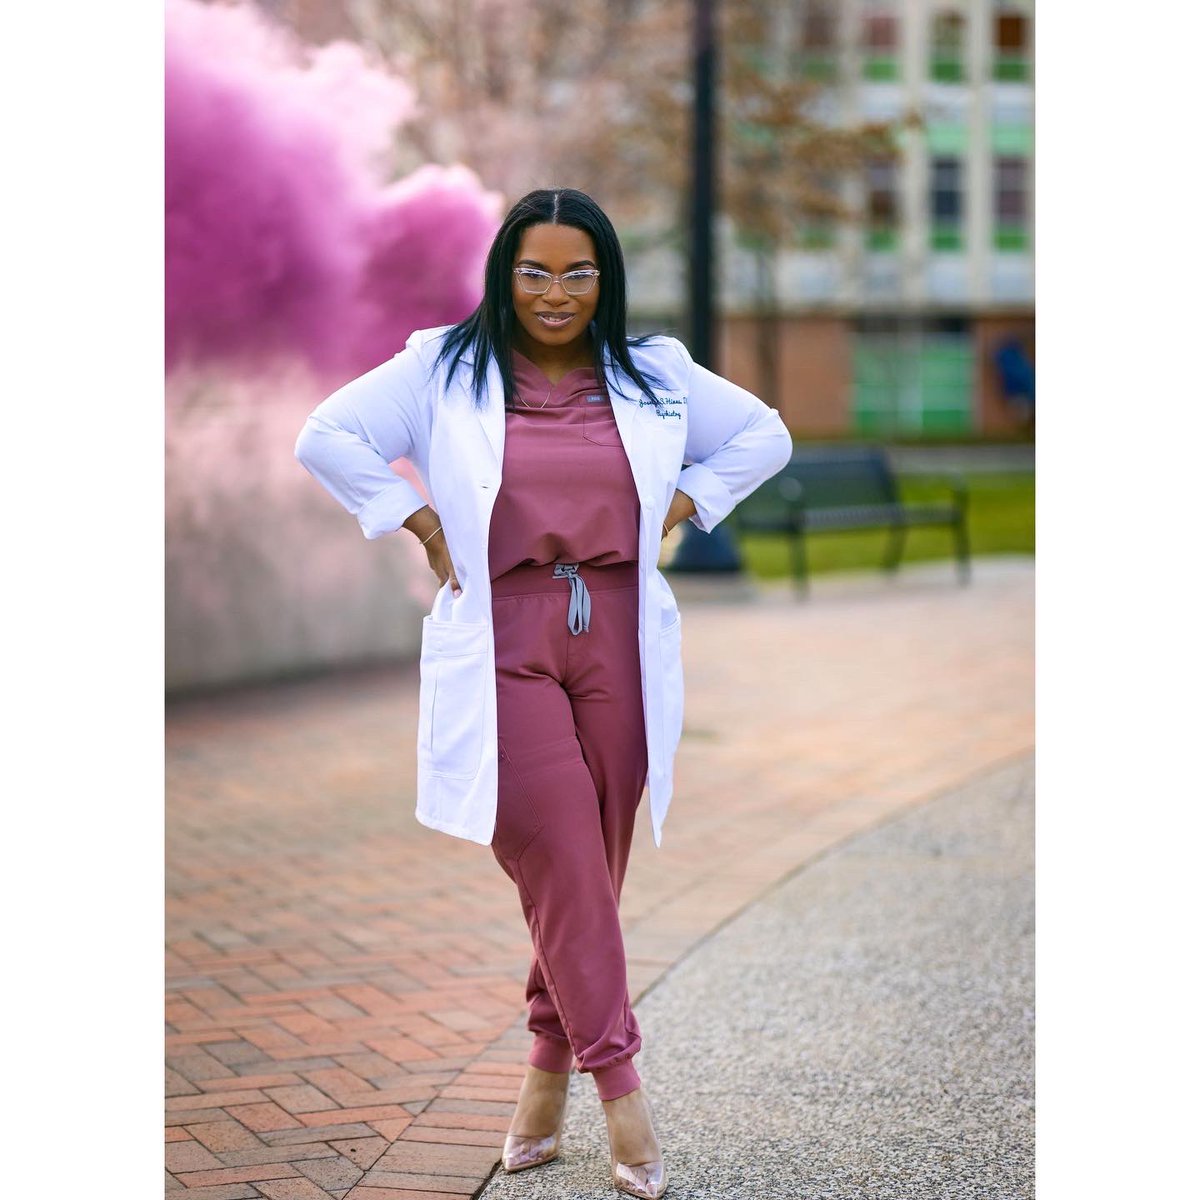 Officially done with medical school🥳Full circle. 27 years ago, I was born in an ambulance right outside of a hospital that didn’t have L&D. I attended medical school at that same hospital, in my backyard. What an honor to learn & train in my community.
#MedGrad #BlackGirlJoy ✨